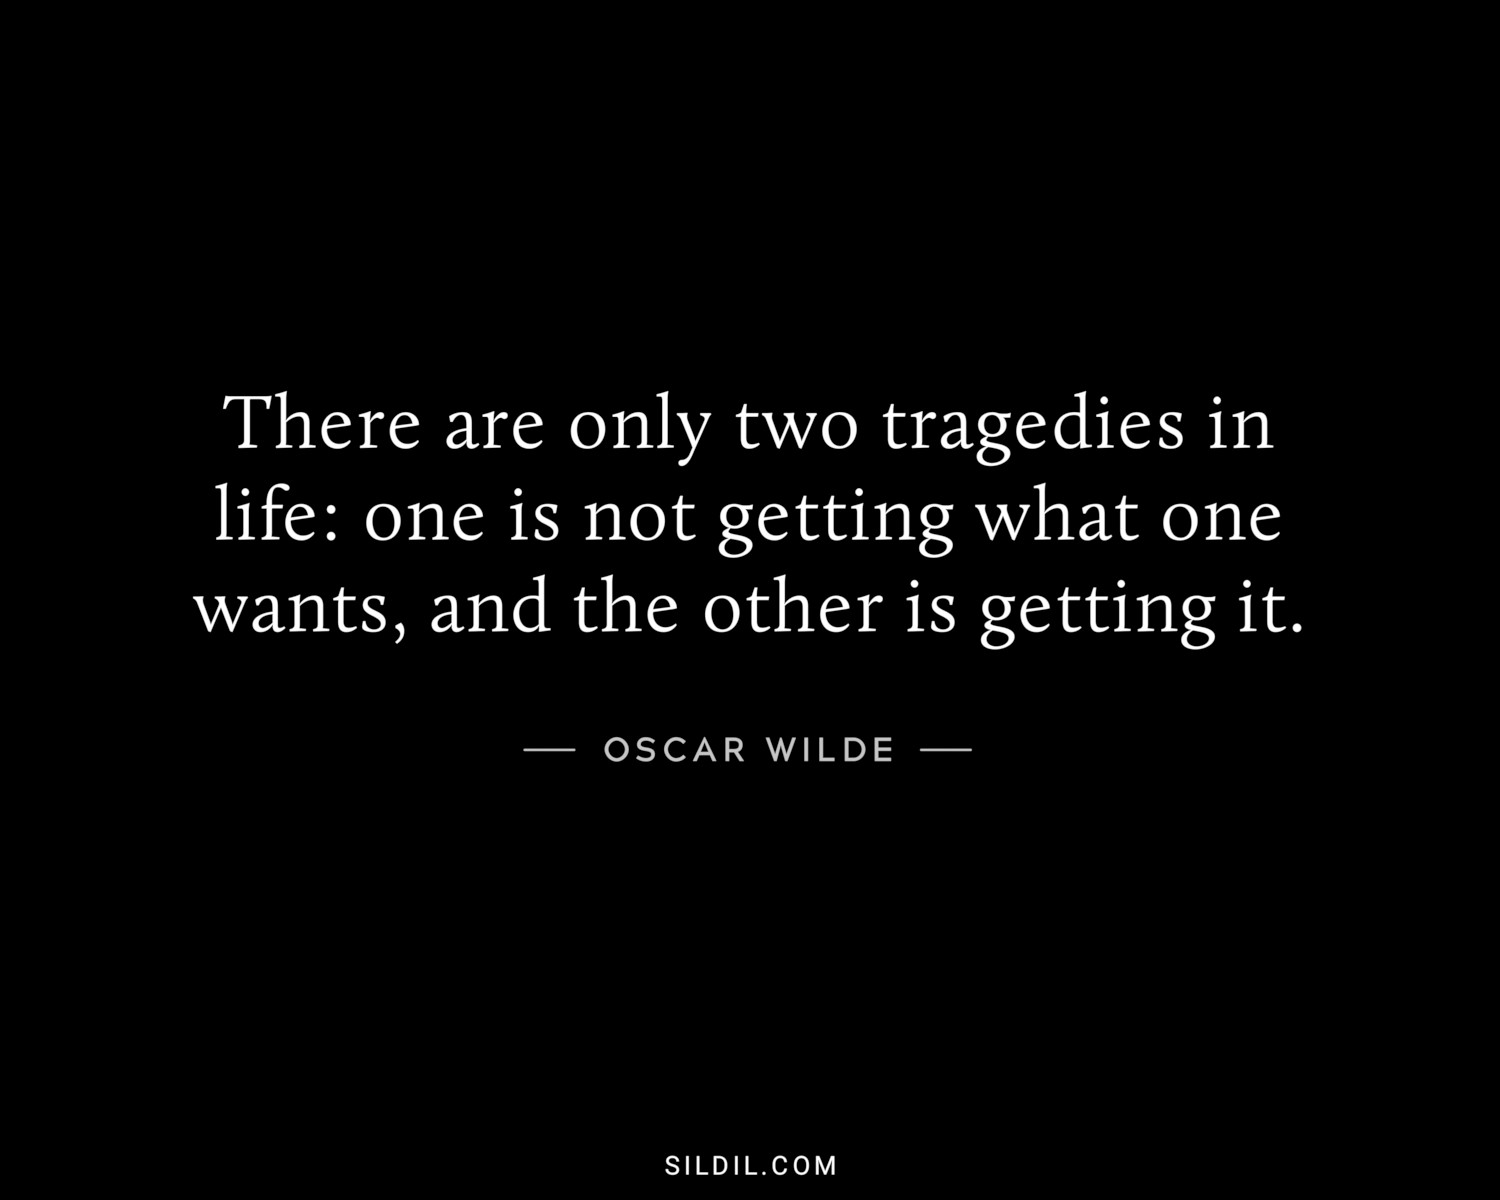 There are only two tragedies in life: one is not getting what one wants, and the other is getting it.